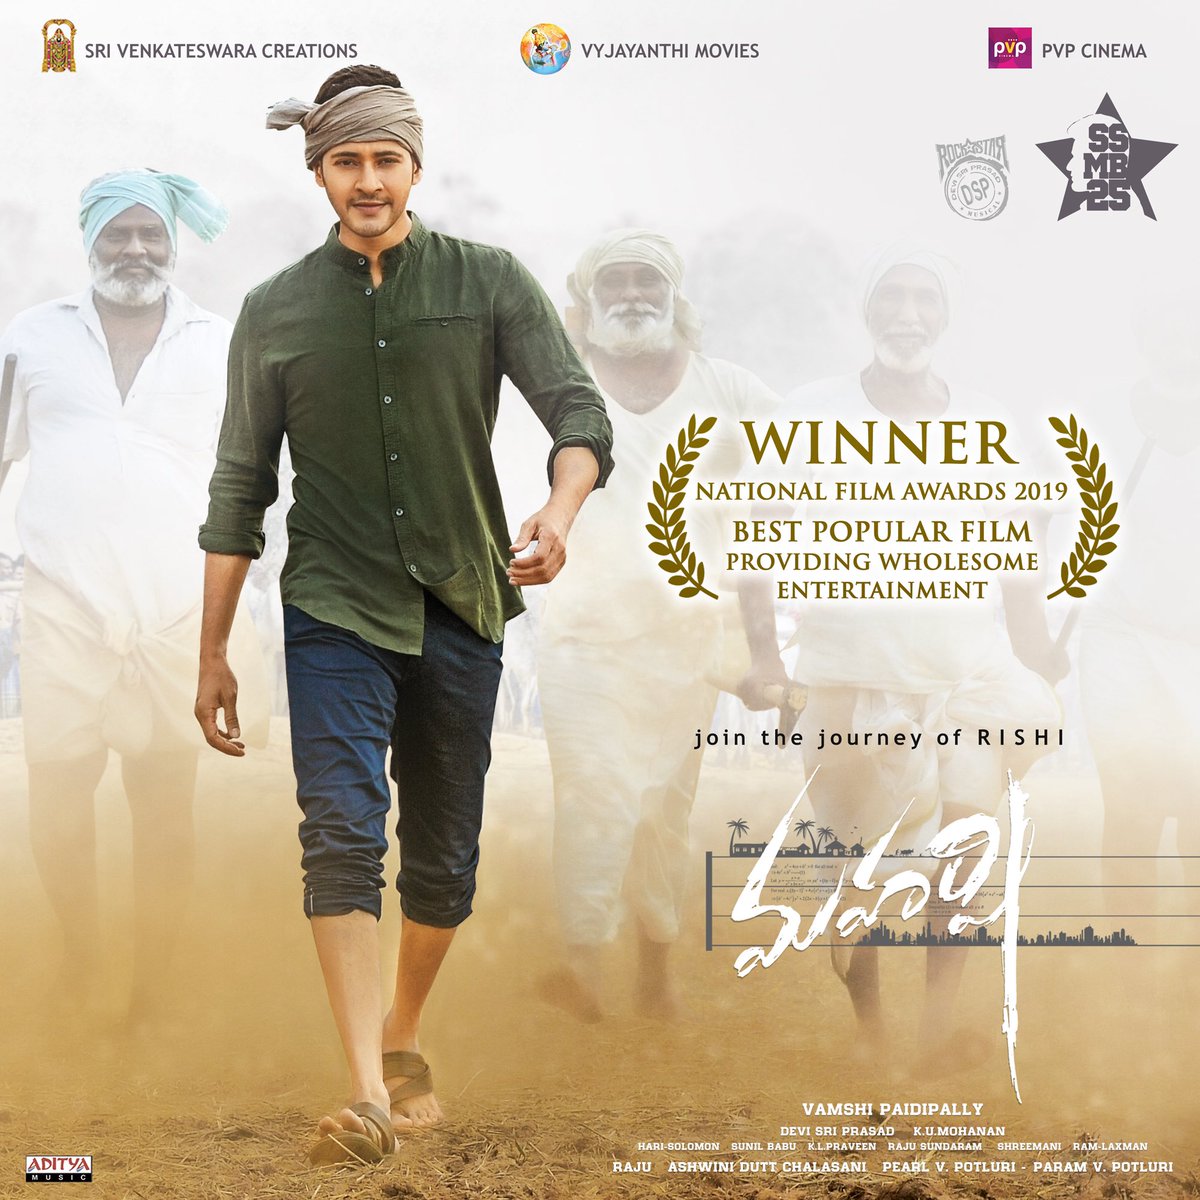 #NationalFilmAwards Honoured and humbled to have received this prestigious recognition!! #Maharshi will always remain special.